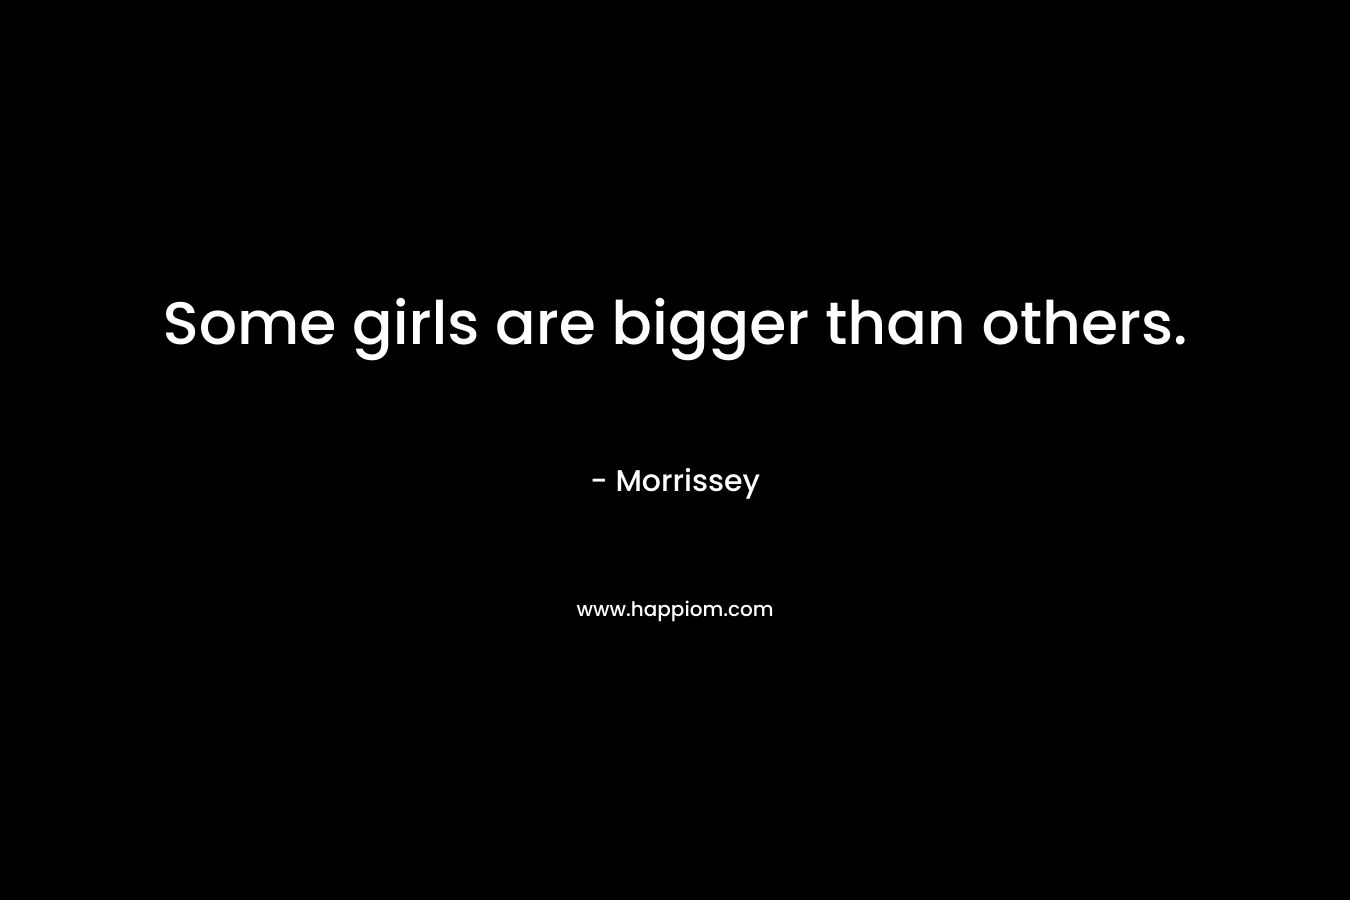 Some girls are bigger than others. – Morrissey